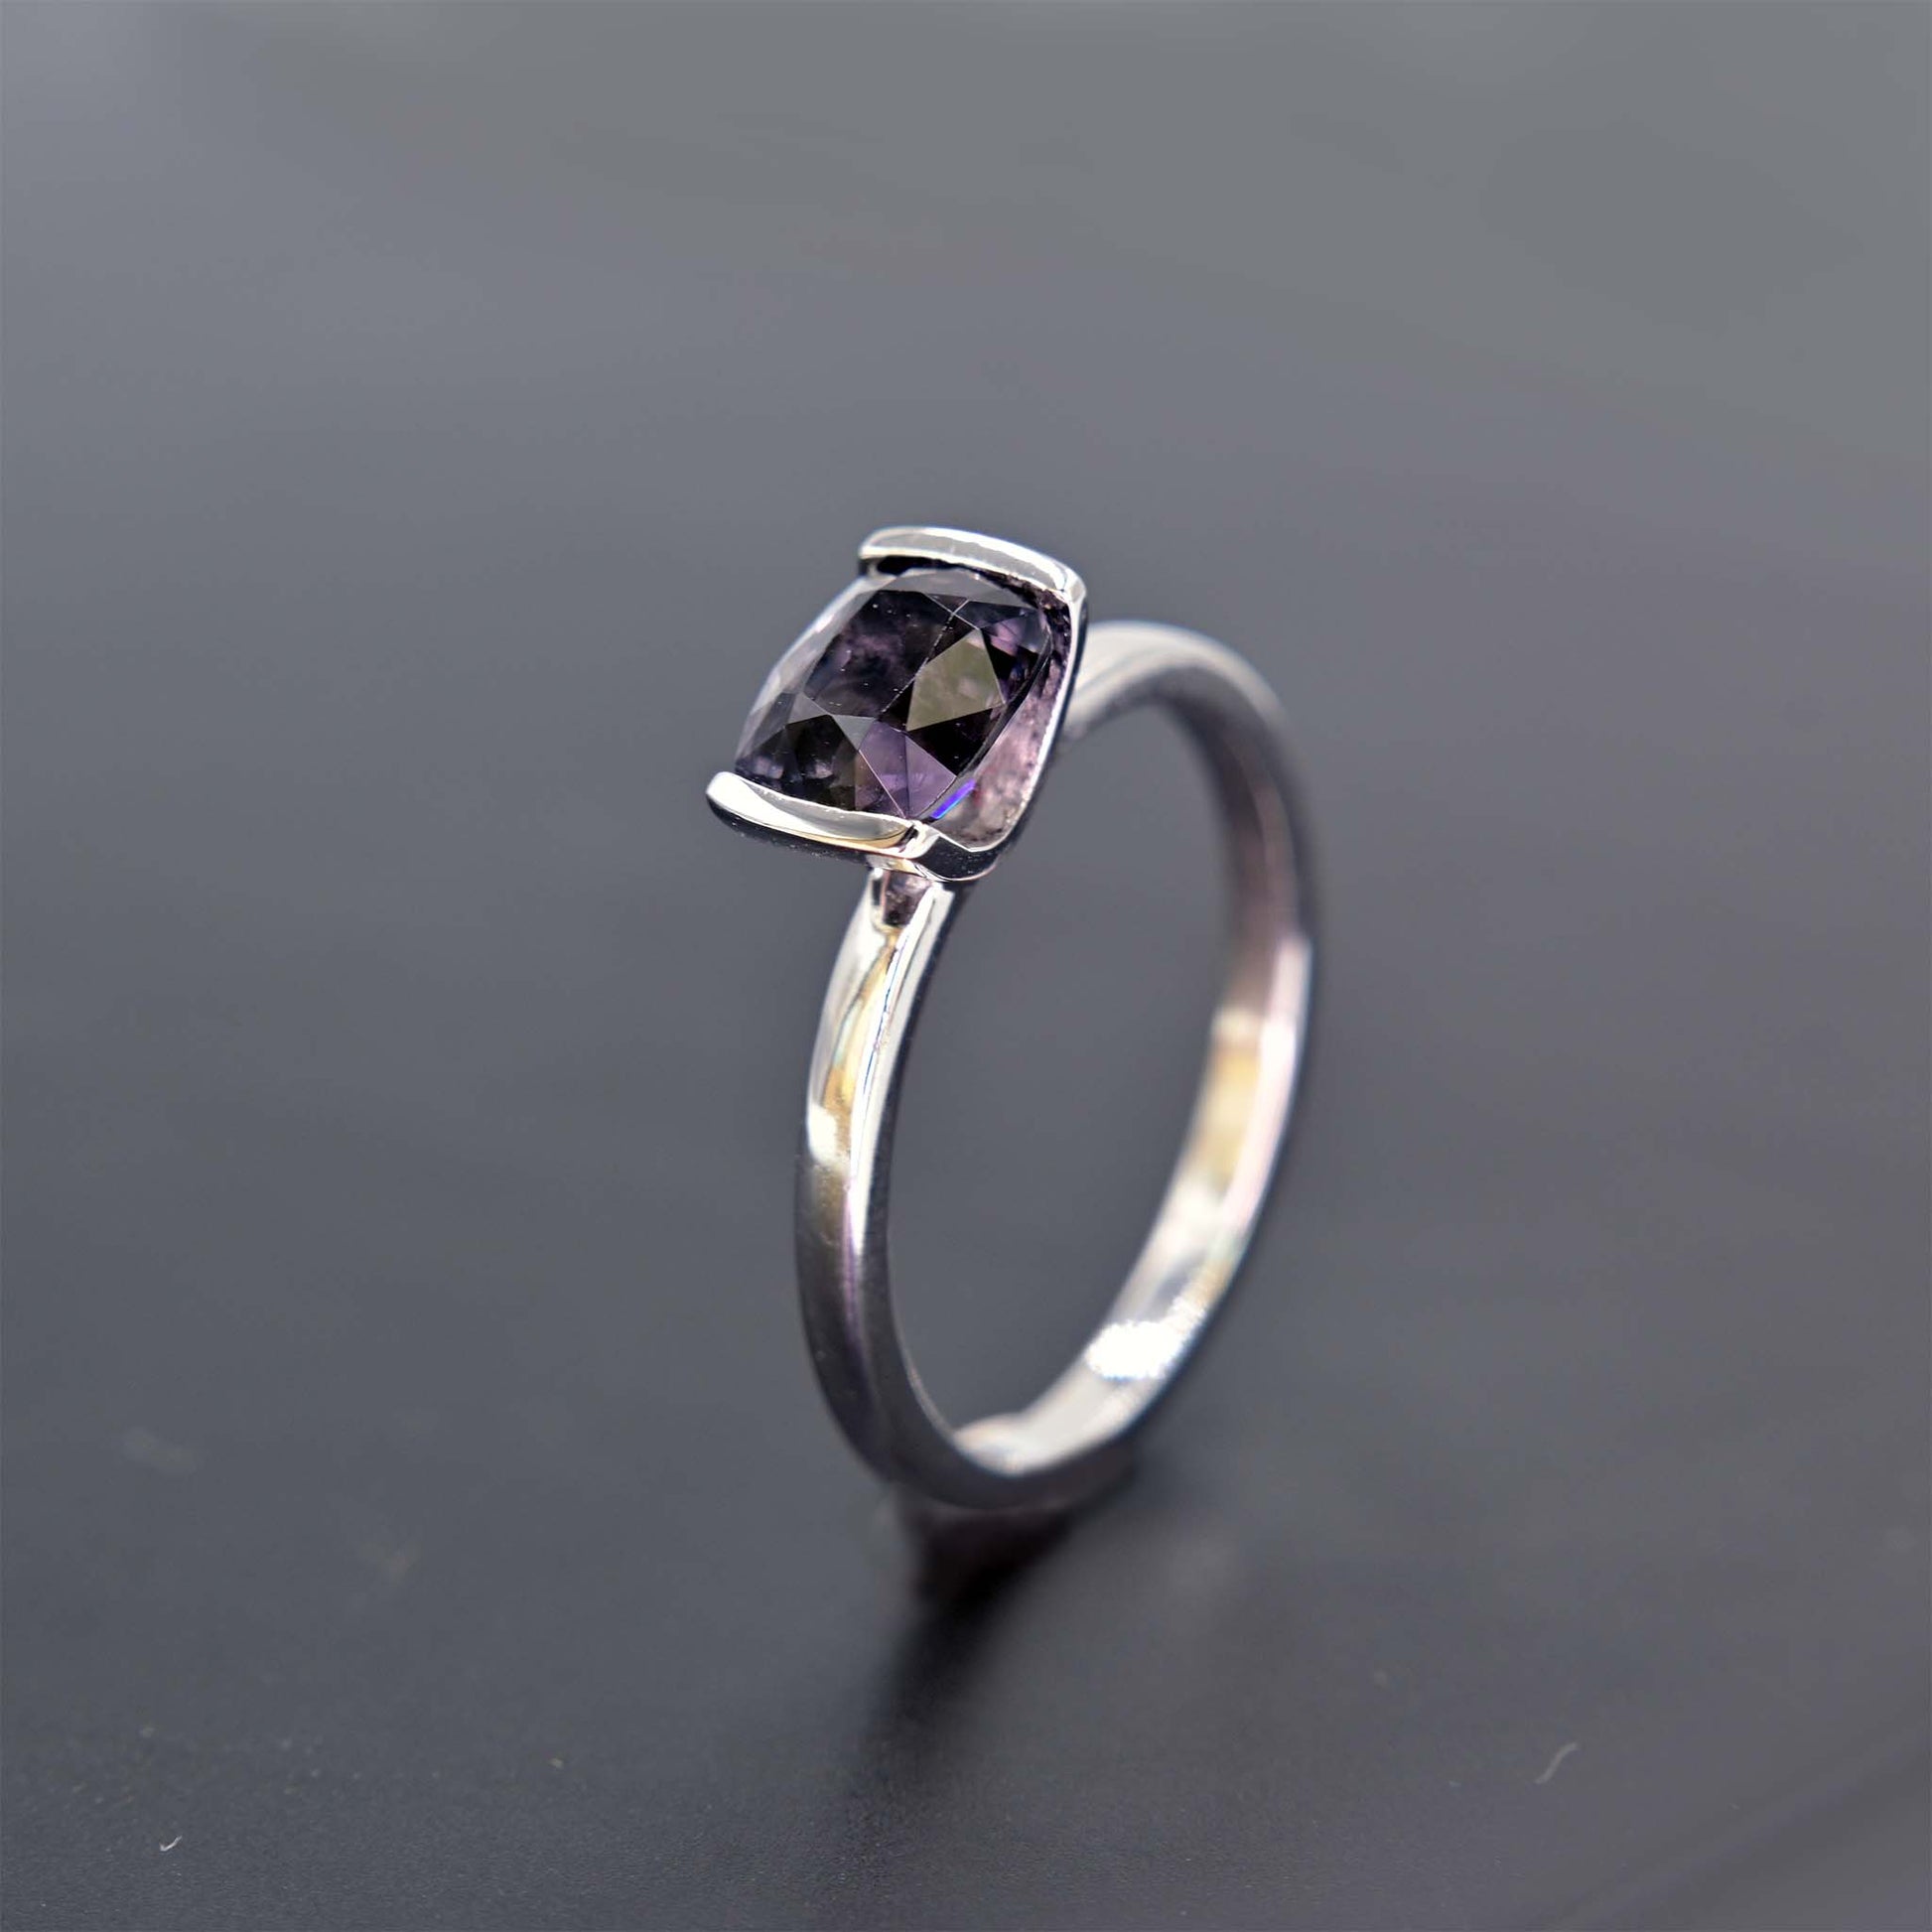 Angle view of grey spinel ring